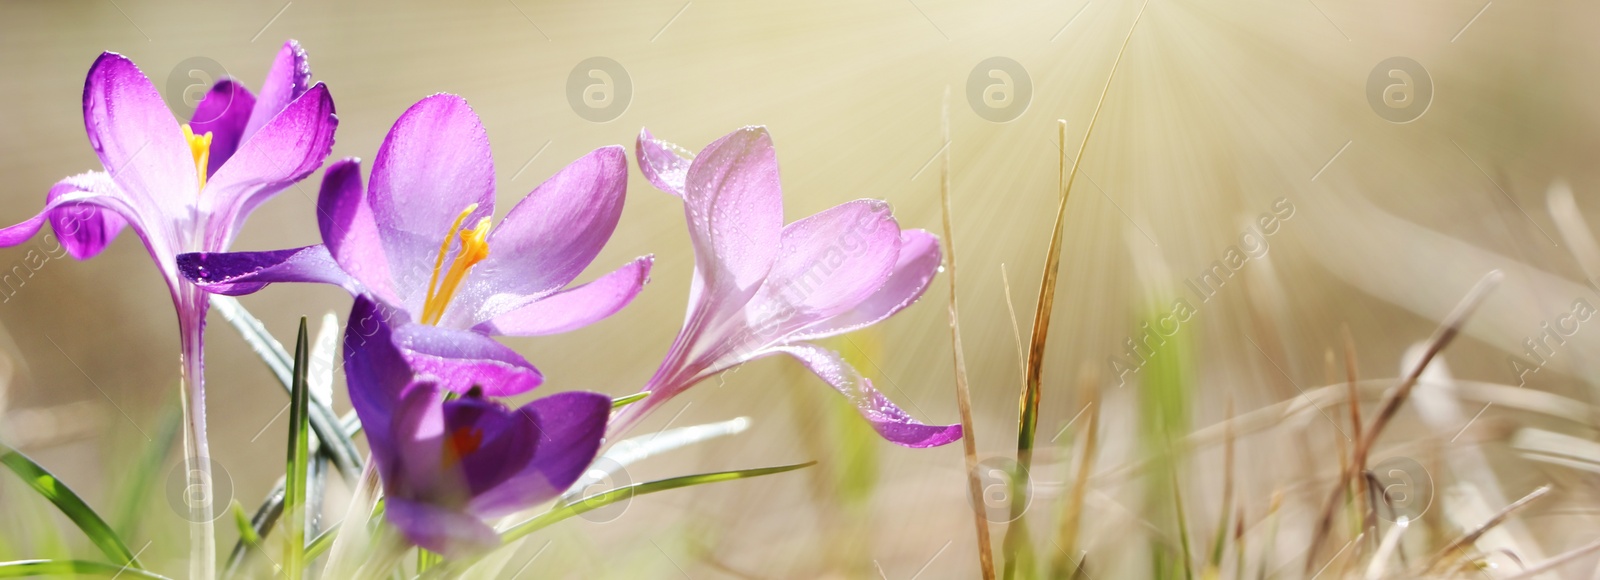 Image of Beautiful purple crocus flowers growing outdoors, closeup view with space for text. Banner design 